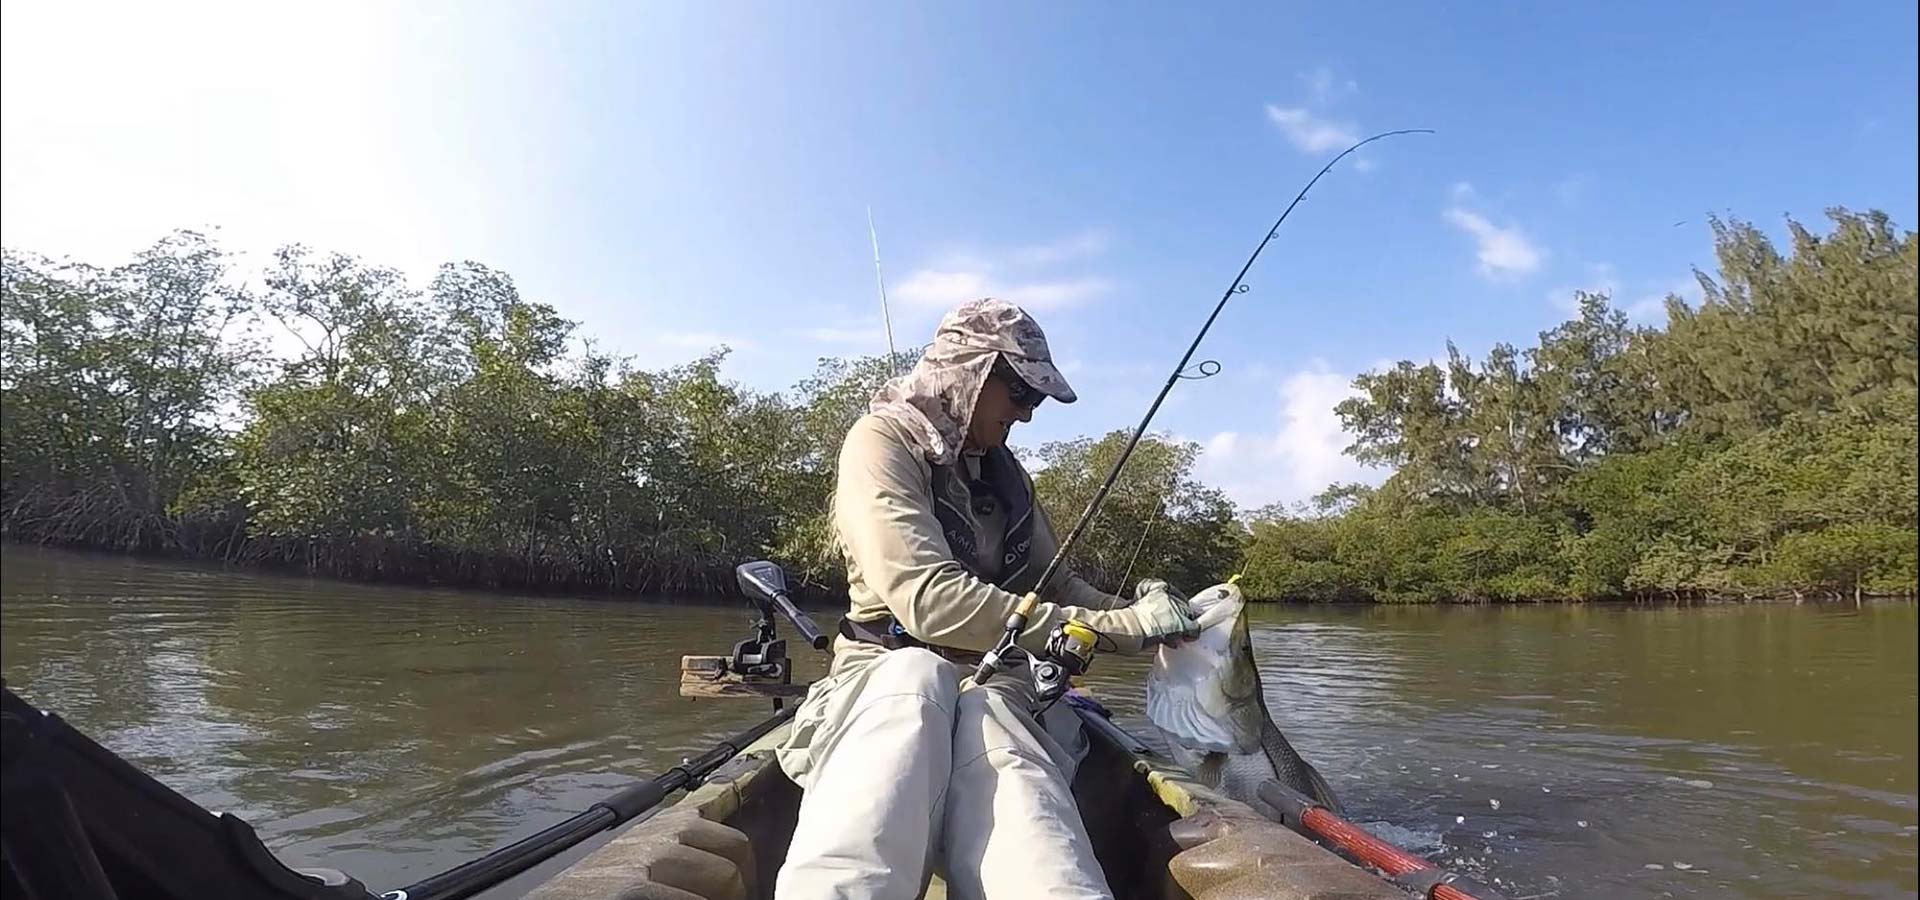 Central Florida Kayak Fishing Tours and Equipment